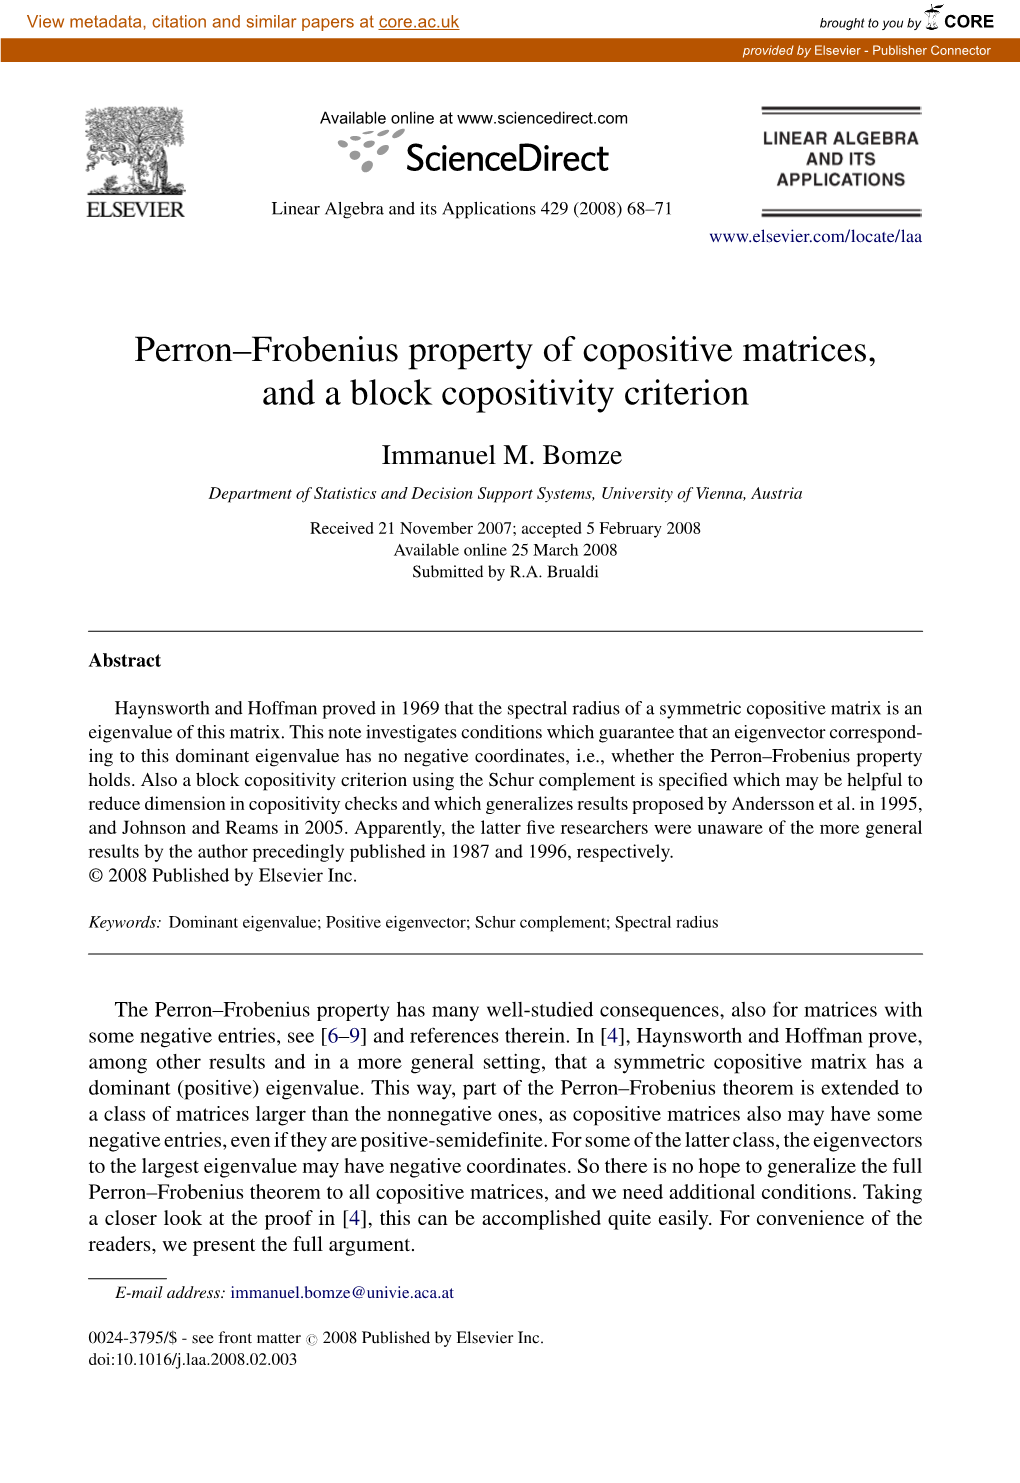 Perron–Frobenius Property of Copositive Matrices, and a Block Copositivity Criterion